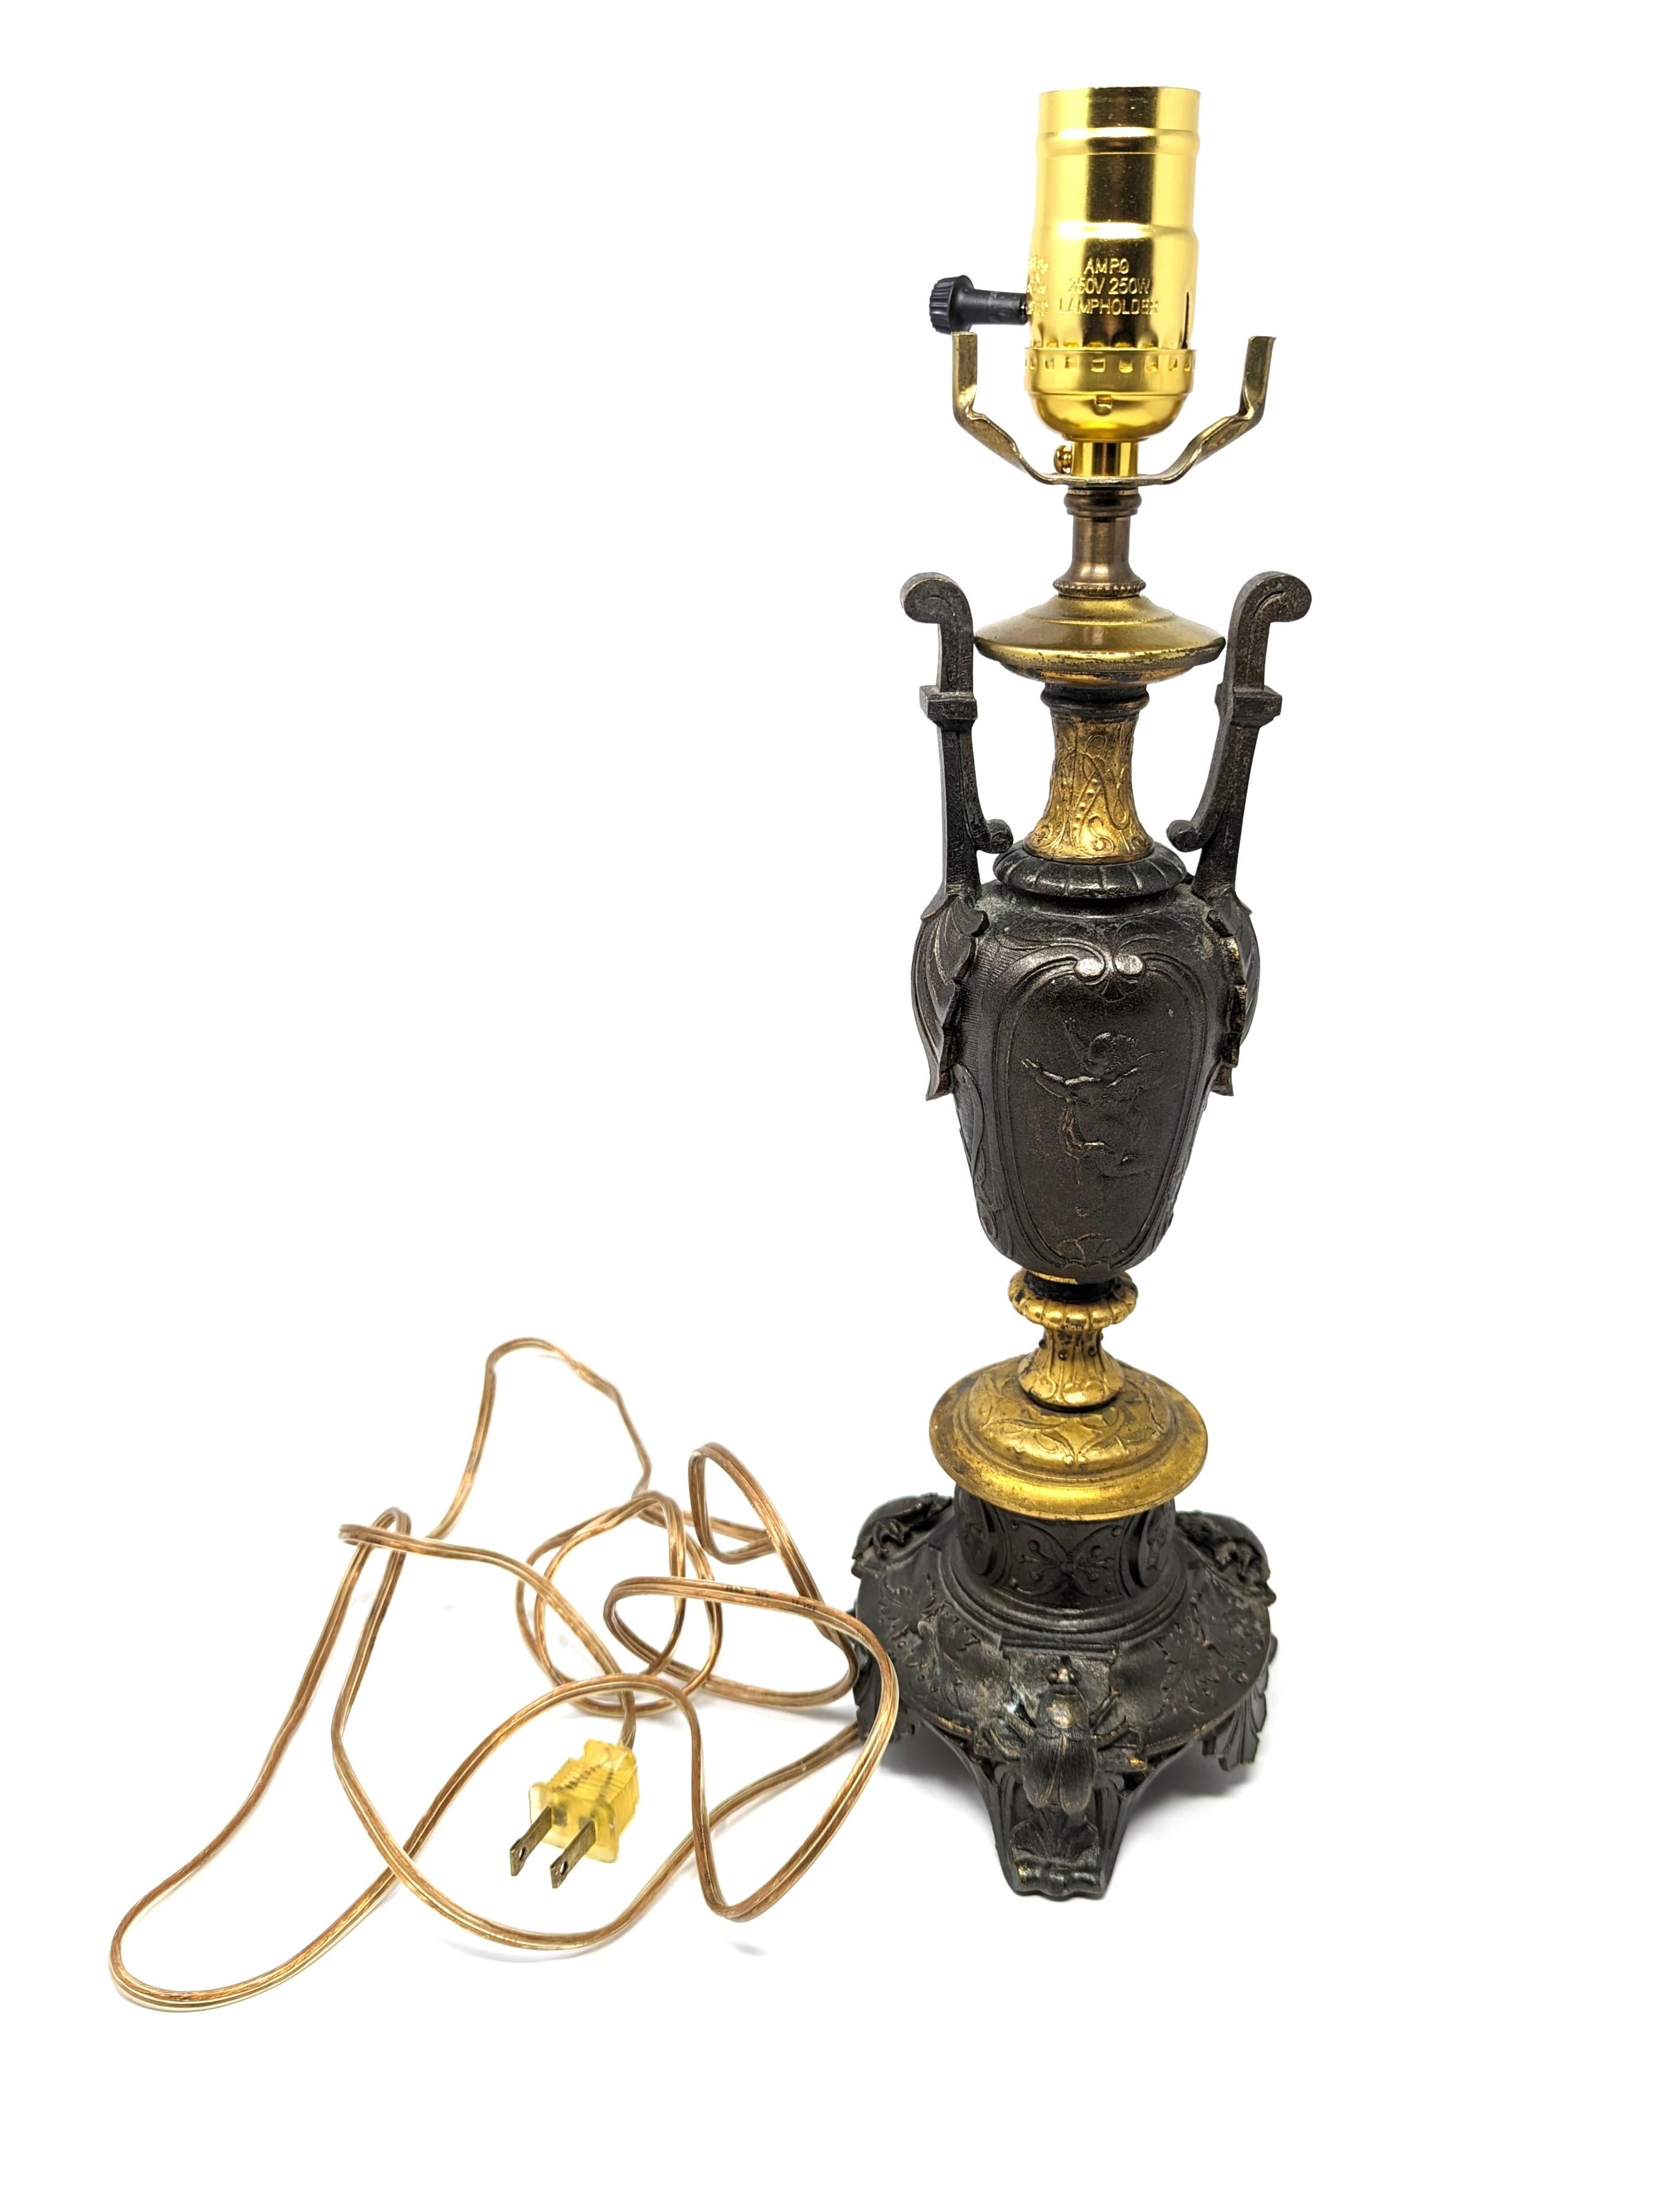 Gilt Antique Phillipe H. Mourey Lamp Gilded Bronze French Signed Cherubs and Beetles For Sale